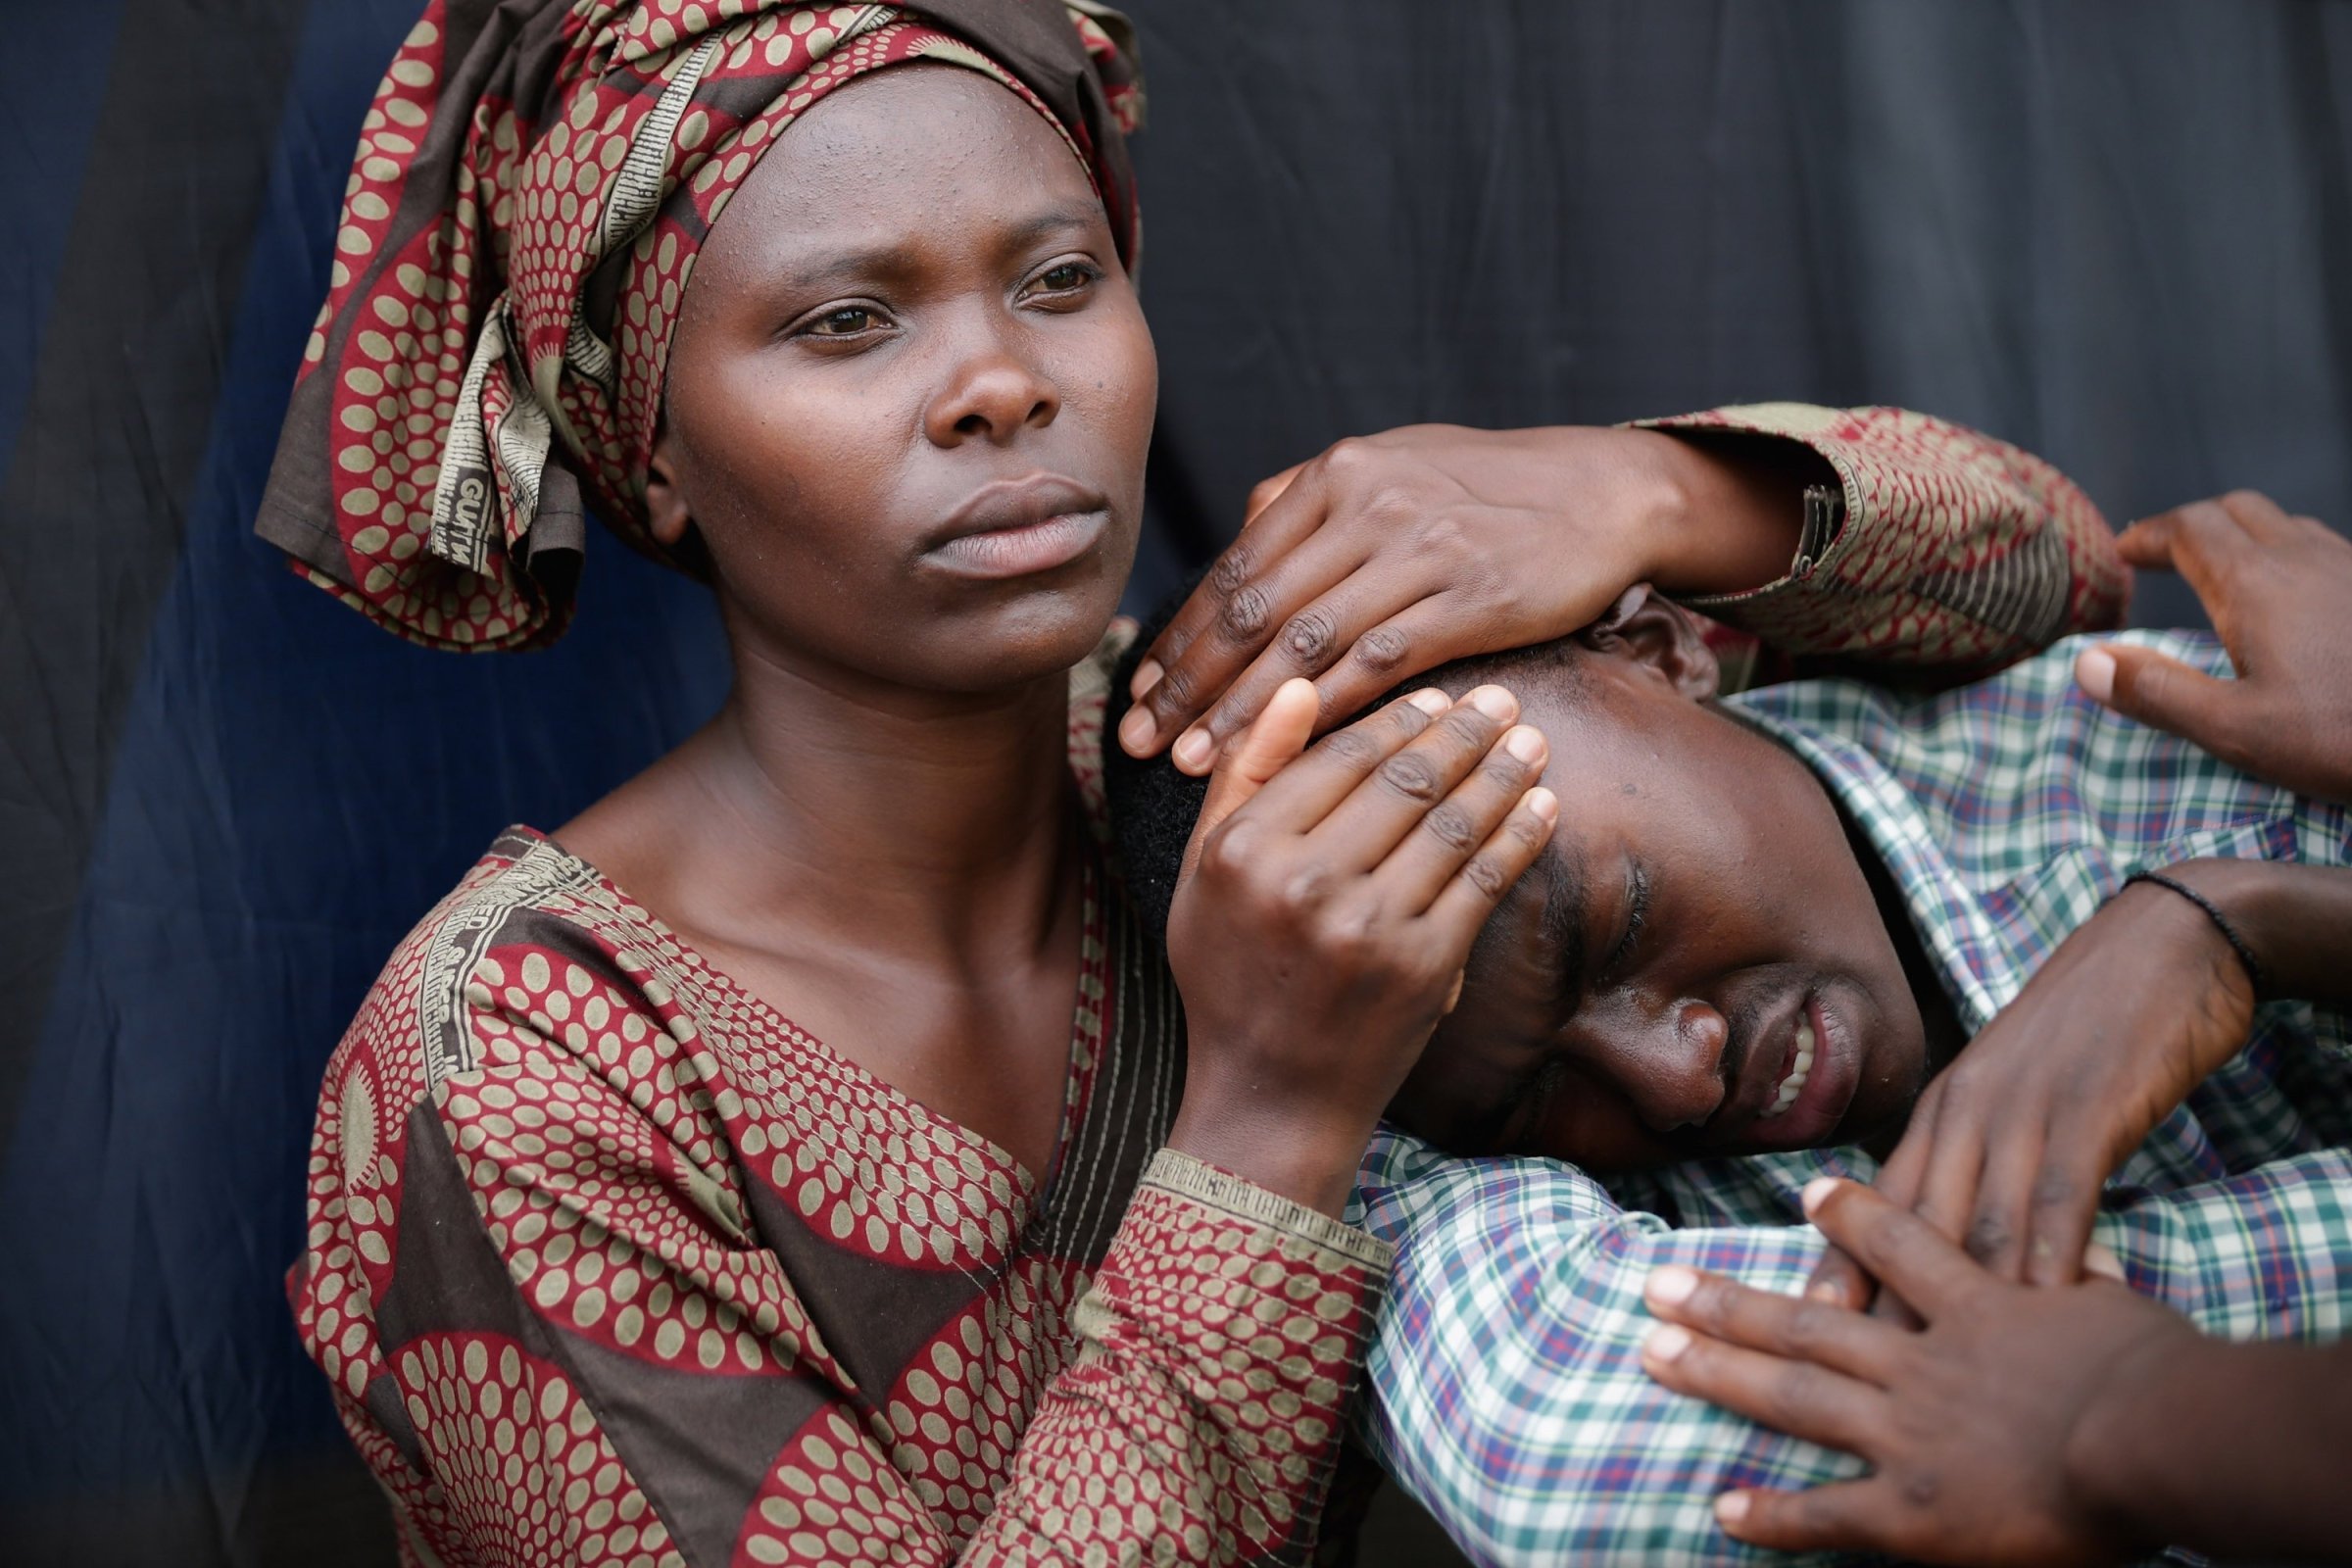 Rwandans impacted by the genocide comfort each other during a commemoration ceremony in Kigali on April 7